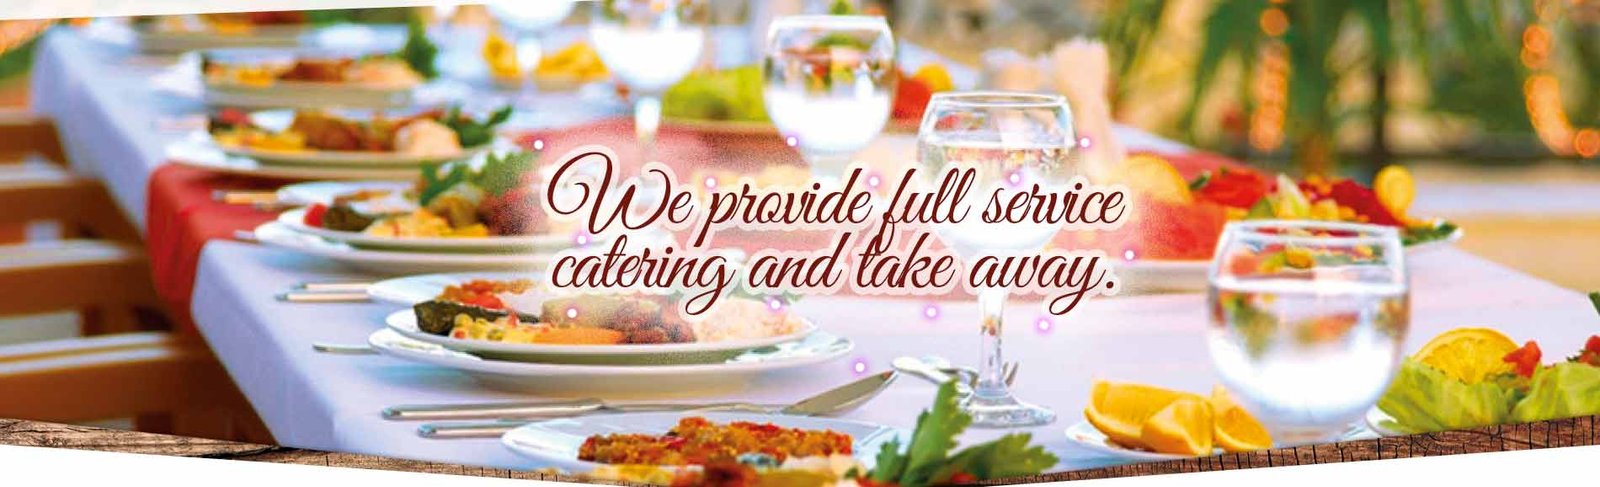 Accommodating Special Diets for your Catering Events in Gage County